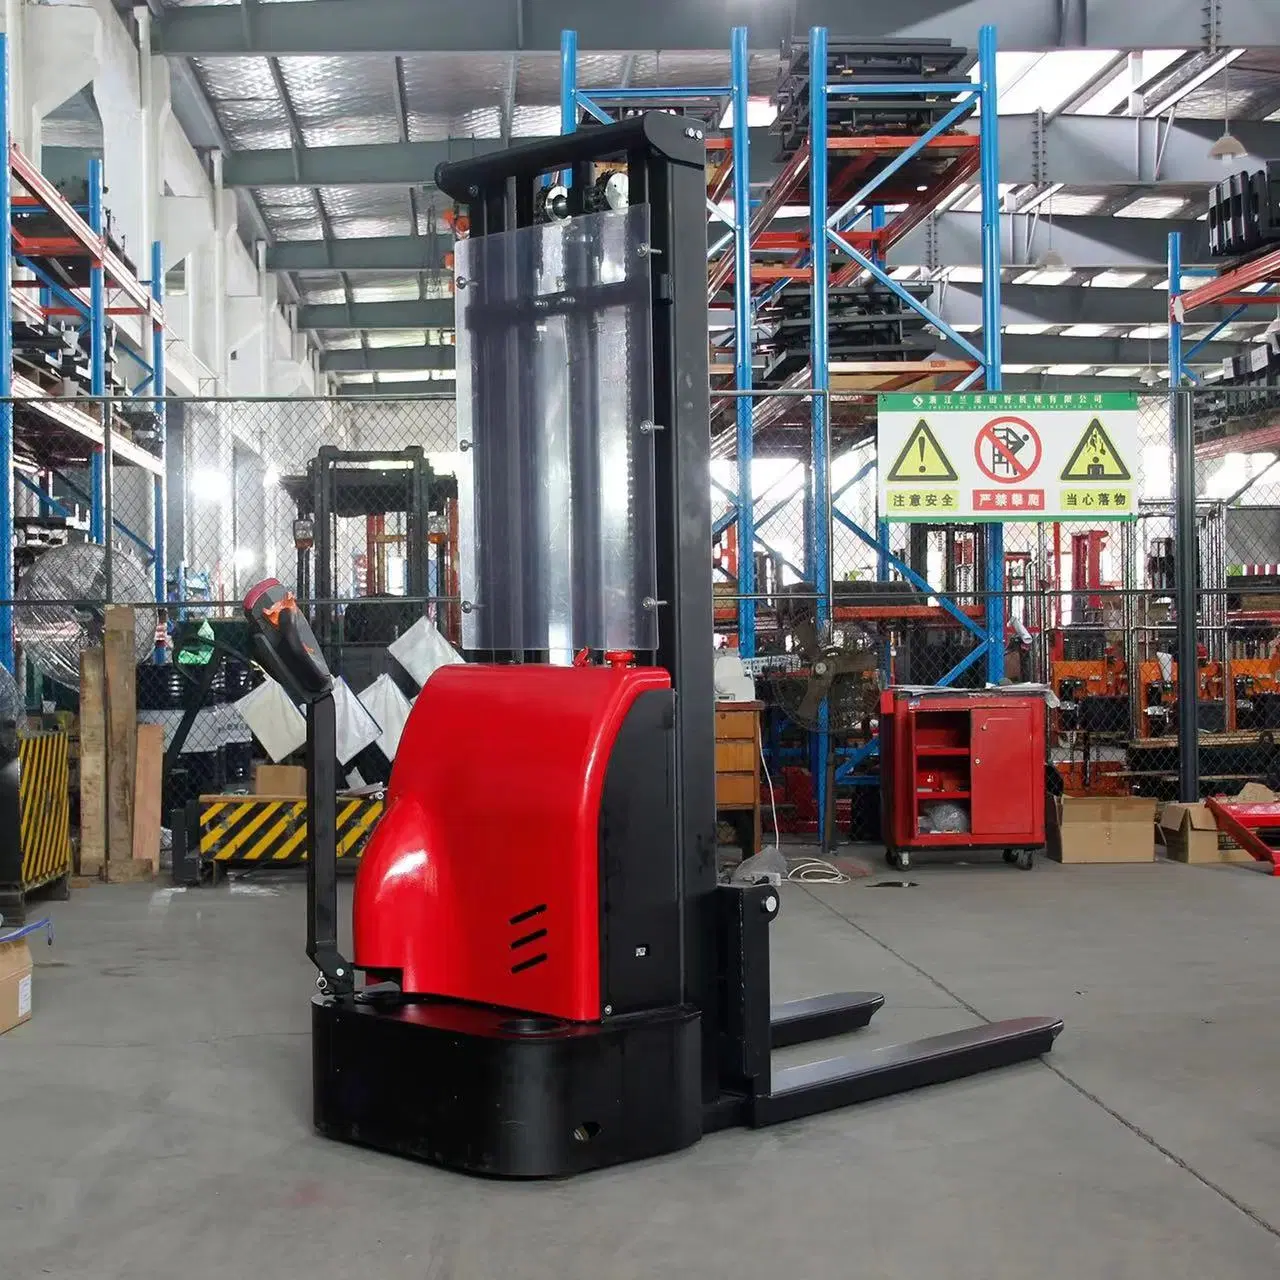 Electric Forklift Affordable 1.5-Ton Stacker Truck with a Maximum Lifting Height of 3-6m, Suitable for Narrow Passages